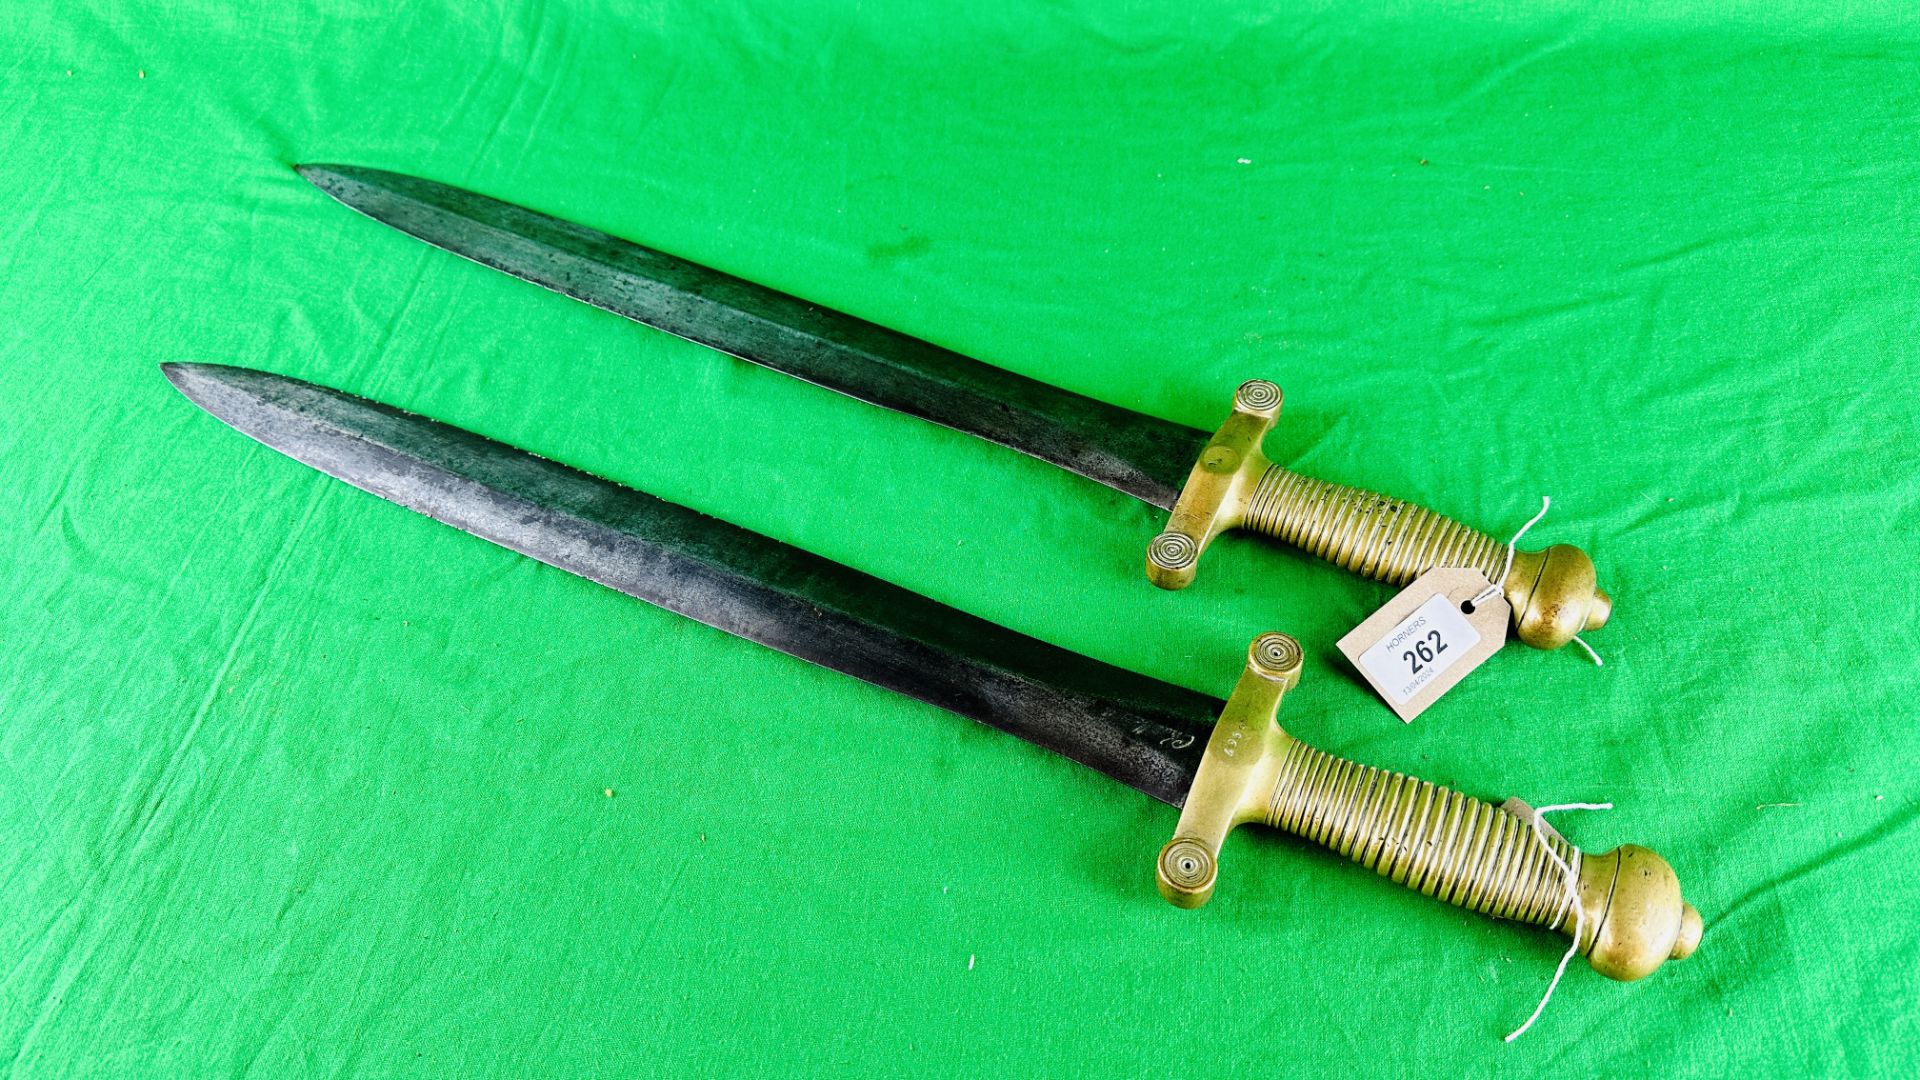 TWO BRASS HANDLED PARIS GUARD SWORDS ONE DATED 1832 PIHET FRERES CHATELLERAULT 2967 - NO POSTAGE OR